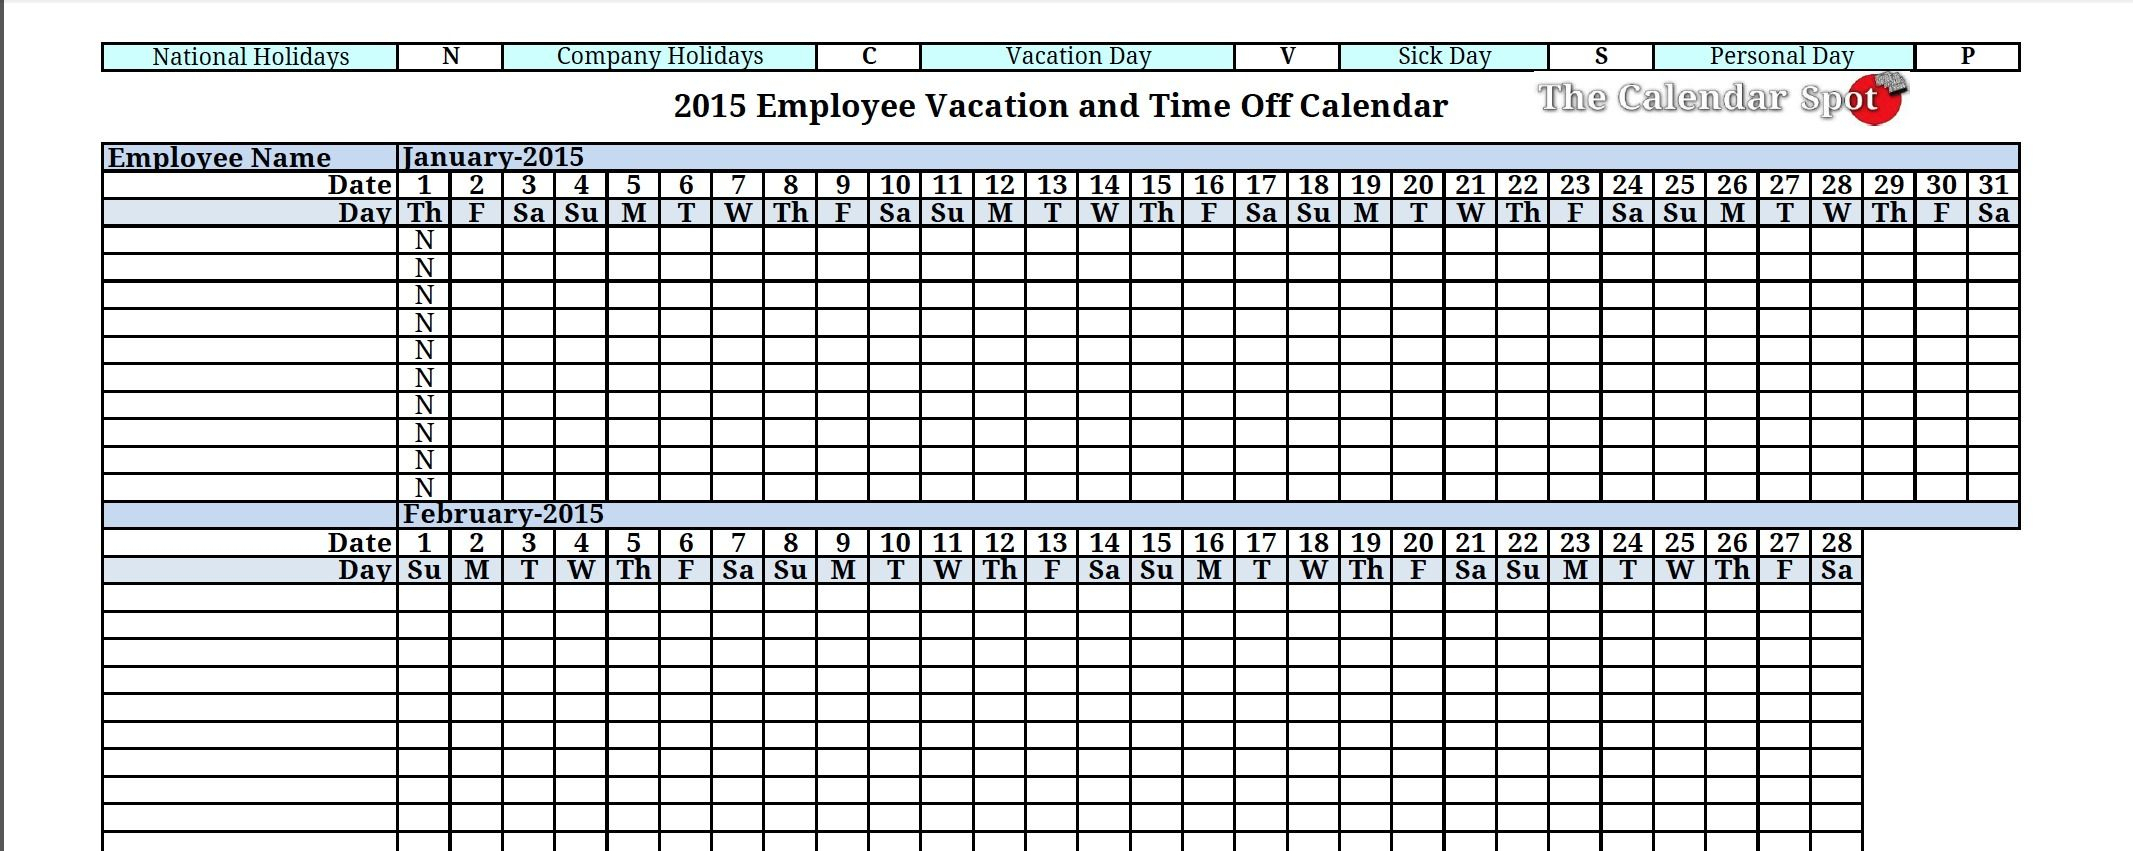 Attendance Tracking Template Free Filename | Down Town Ken More throughout Employee Attendance Tracking Spreadsheet